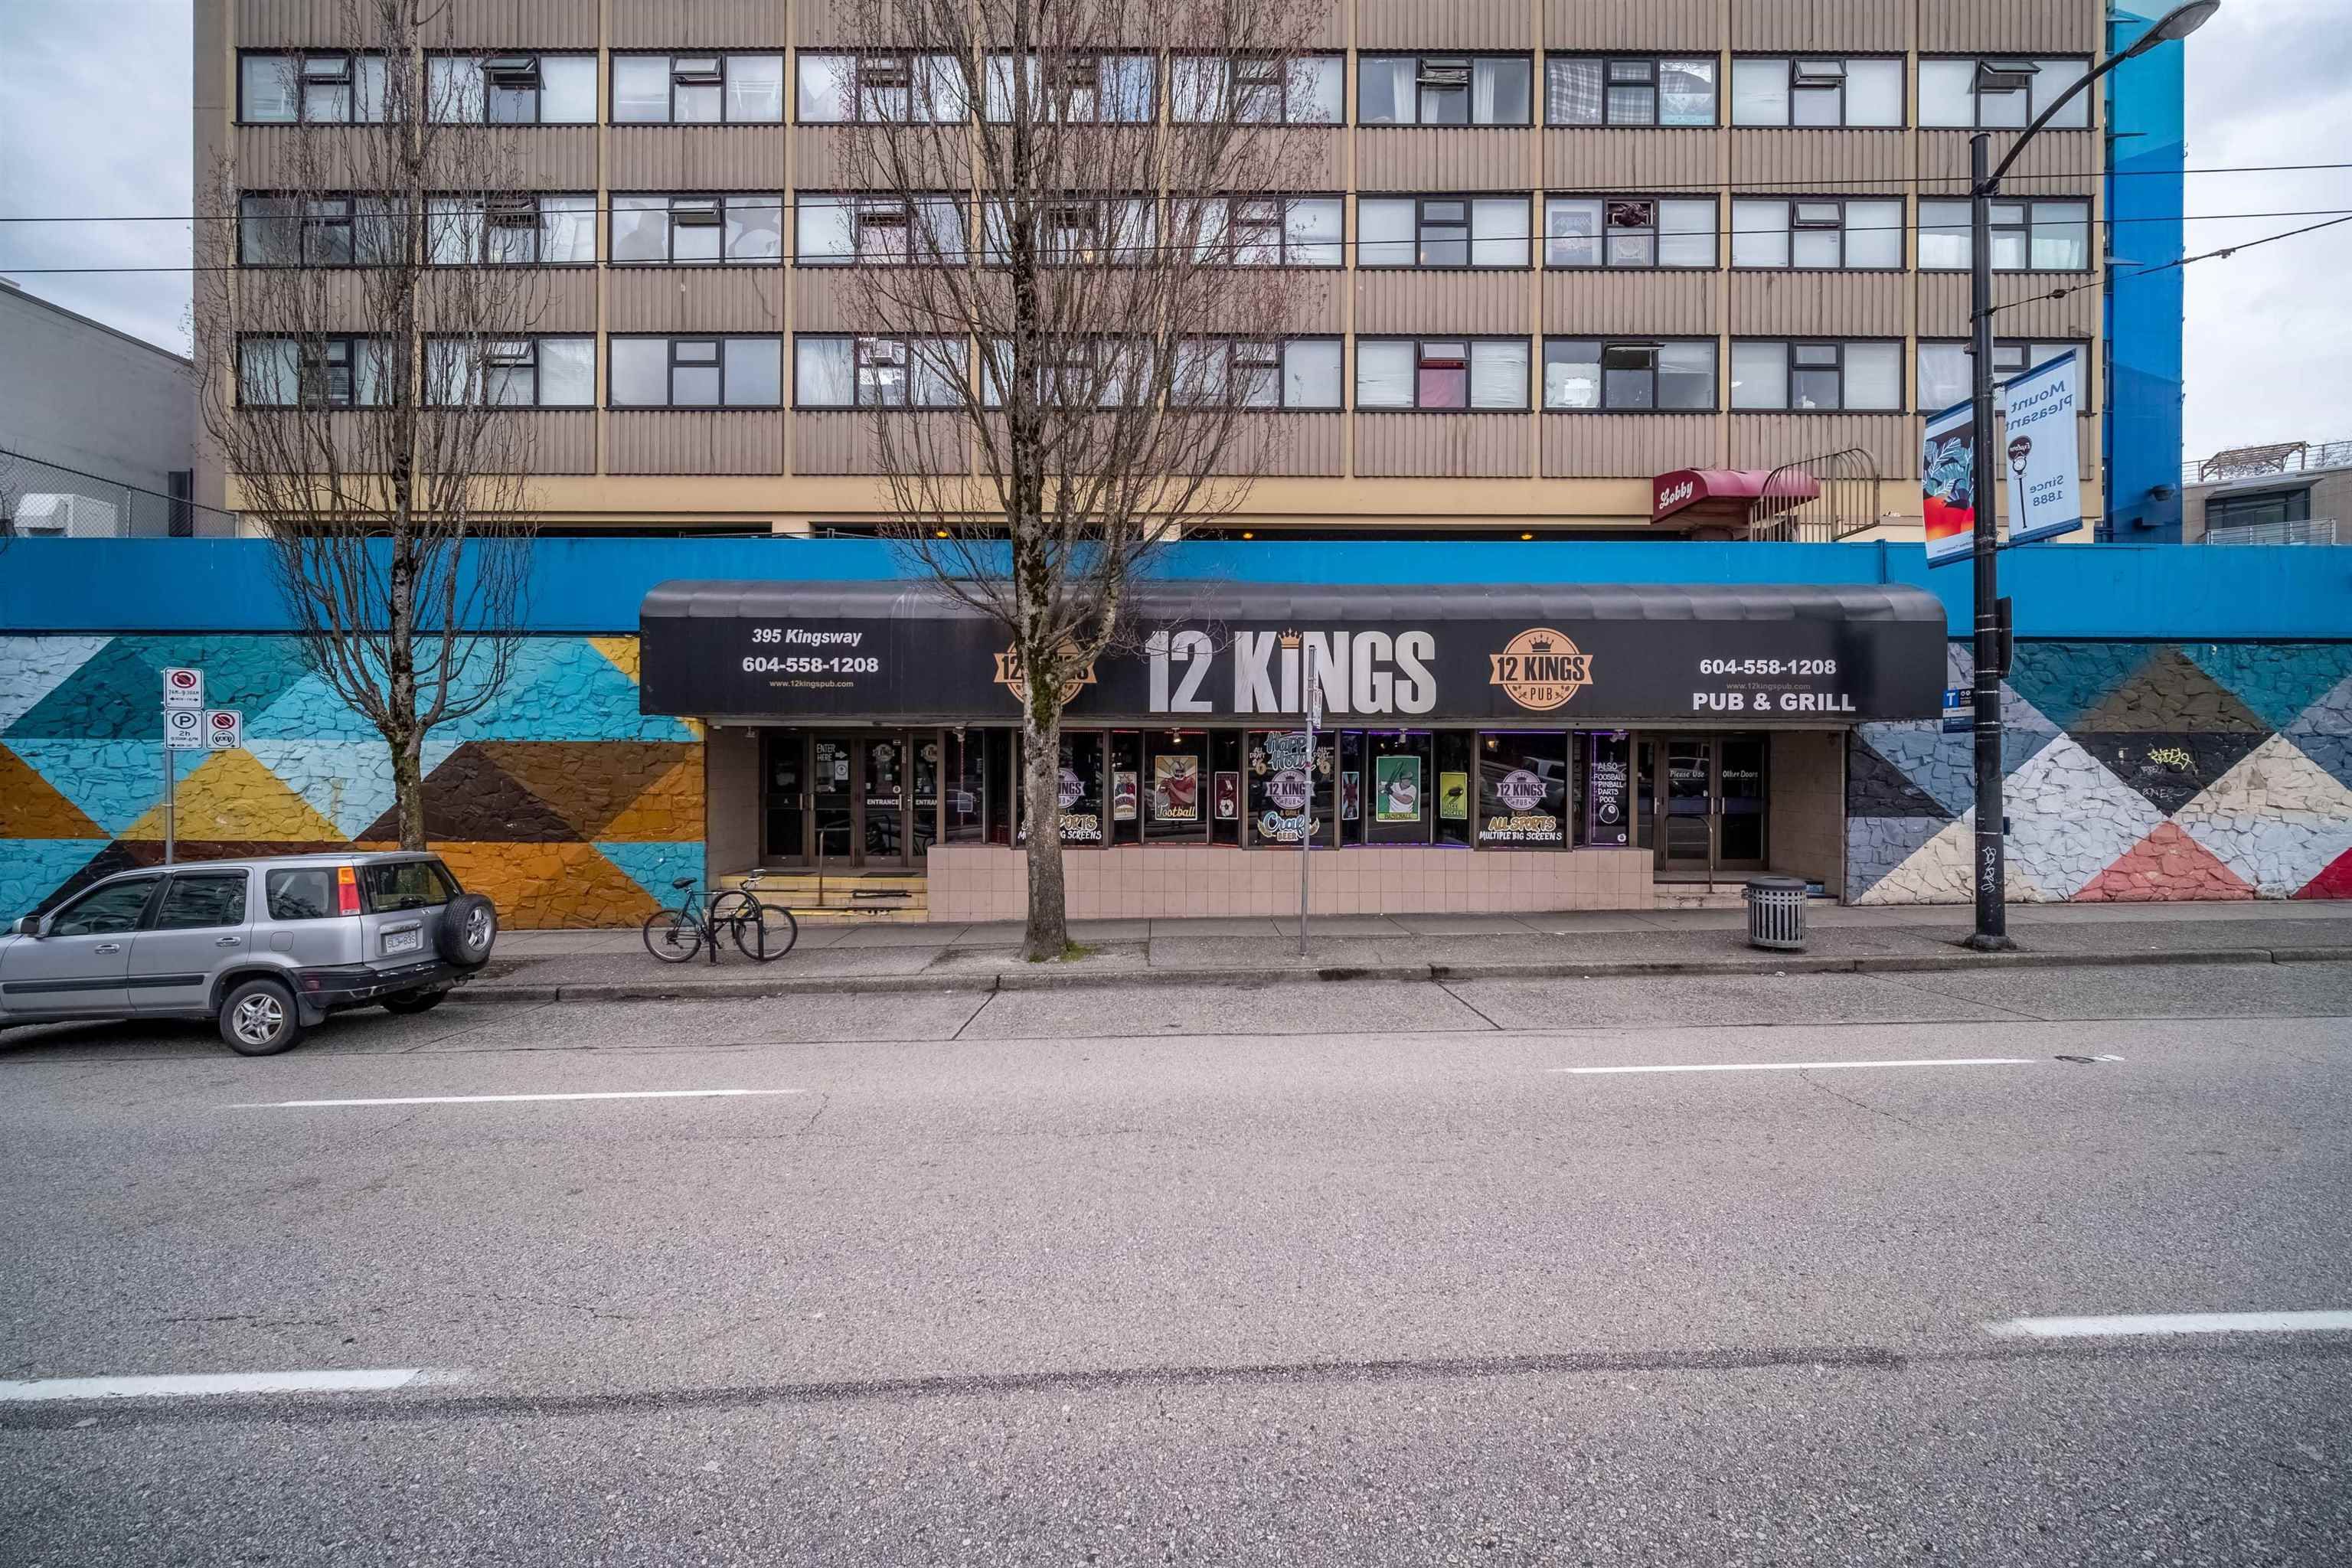 Main Photo: 395 KINGSWAY in Vancouver: Mount Pleasant VE Retail for lease (Vancouver East)  : MLS®# C8051204